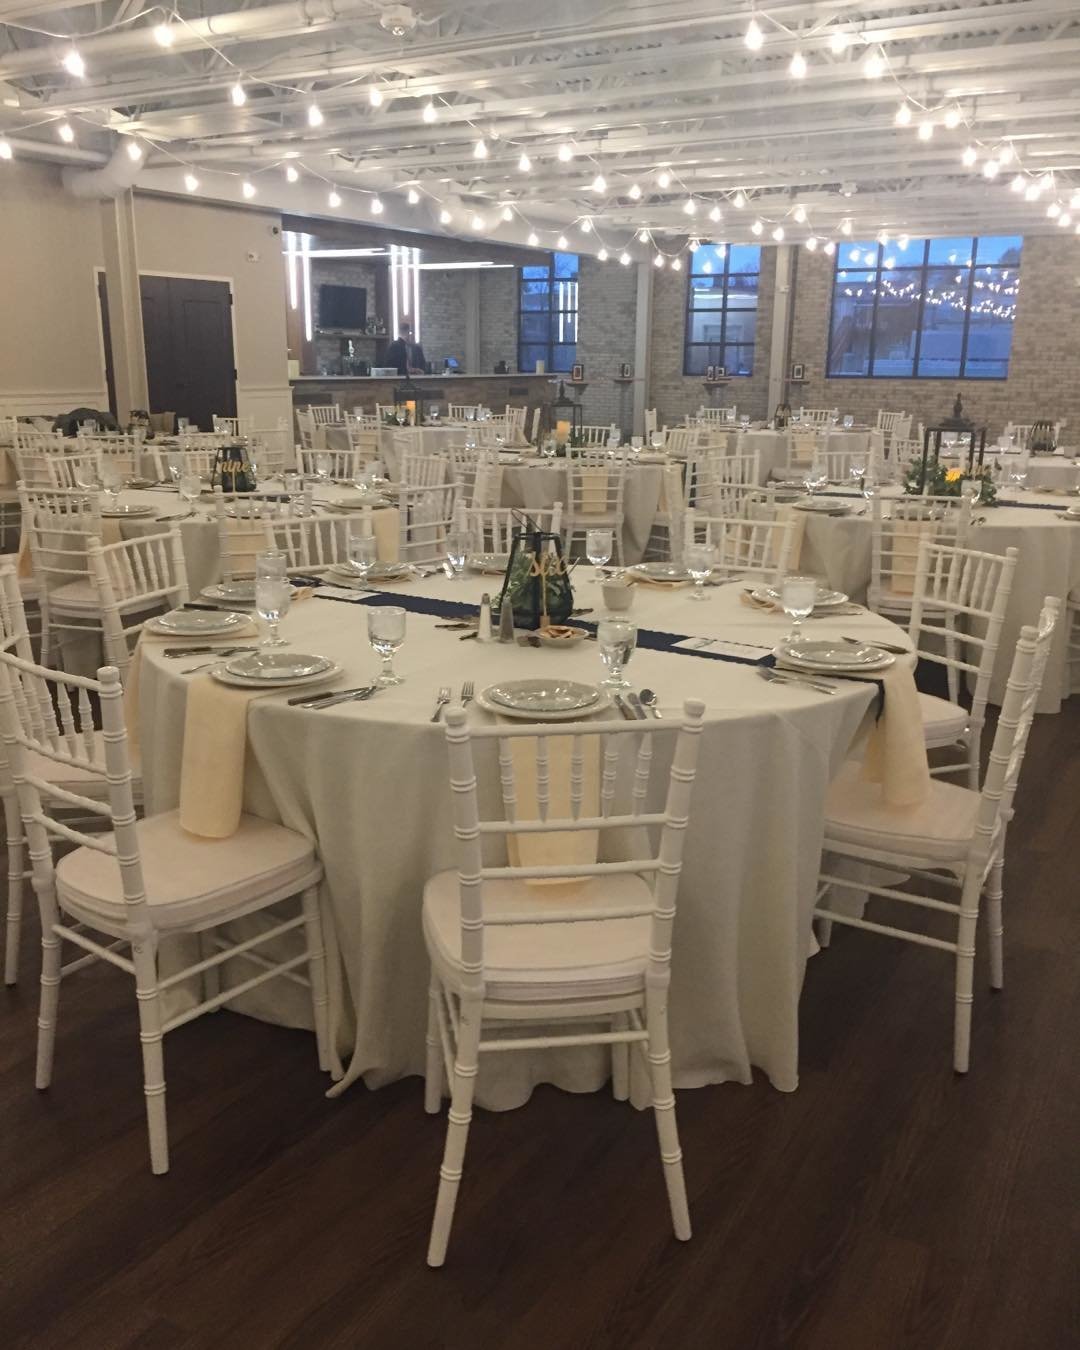 White tables and chairs set up for a wedding